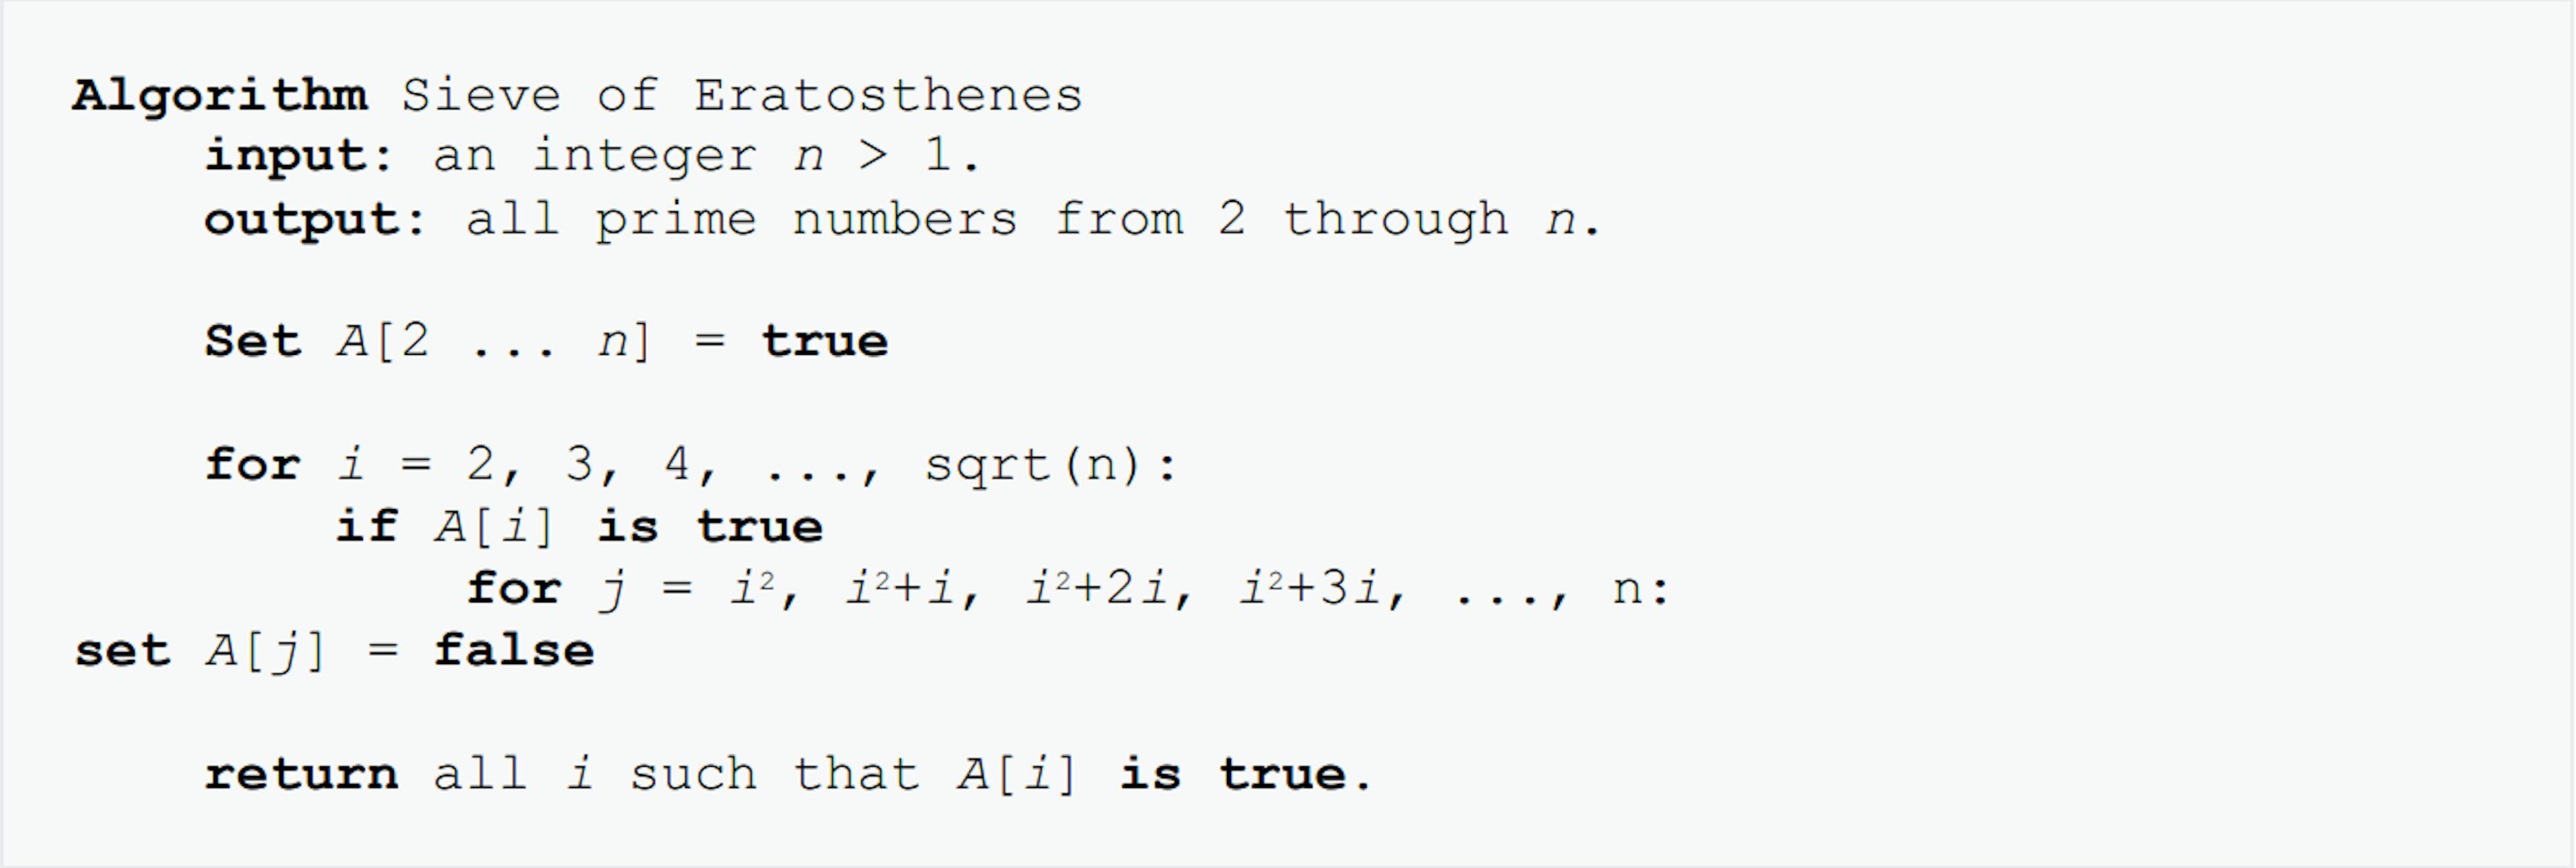 Figure 1. Pseudocode for the Sieve of Eratosthenes.